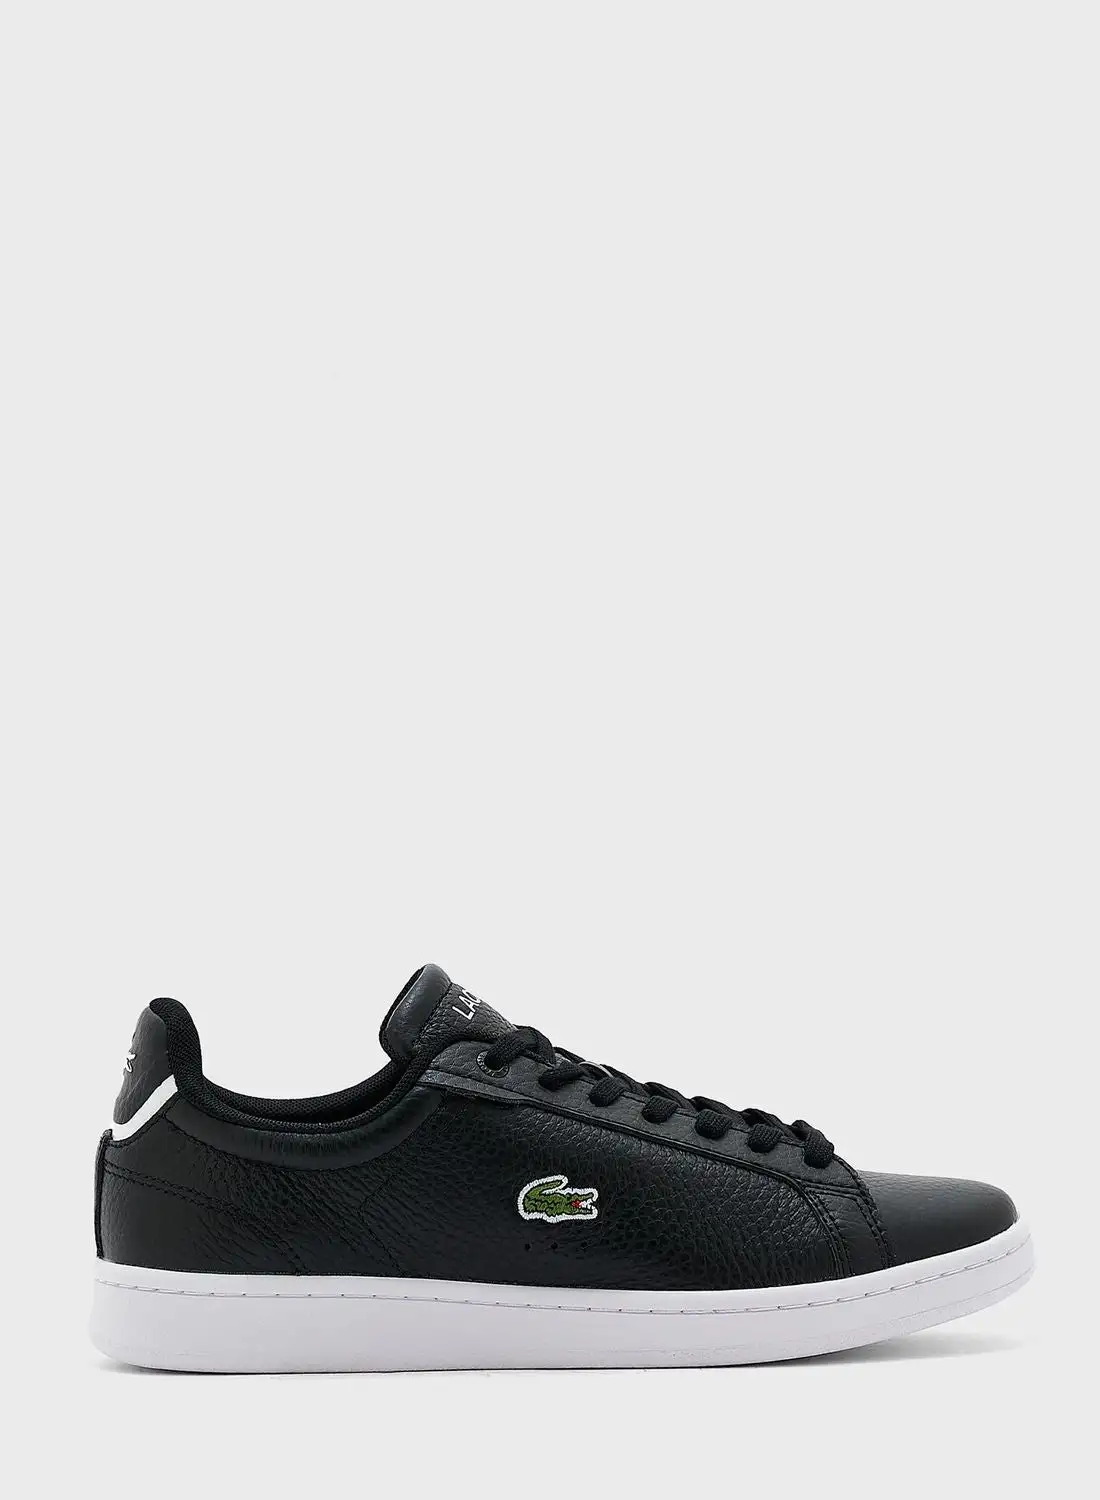 LACOSTE Carnaby Pro 222 1 Sneakers